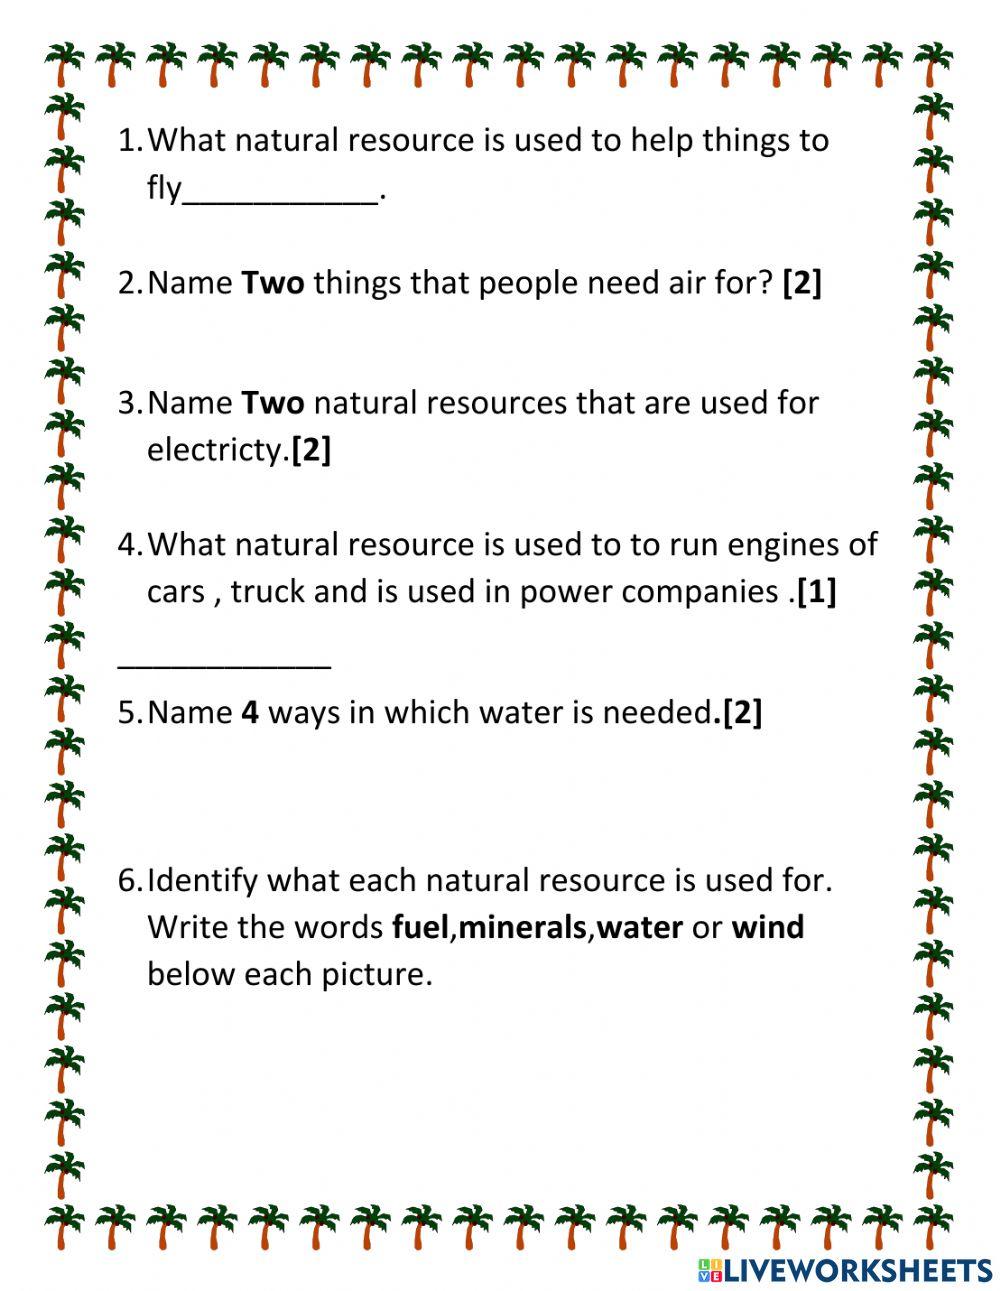 Reasons for Natural Resources